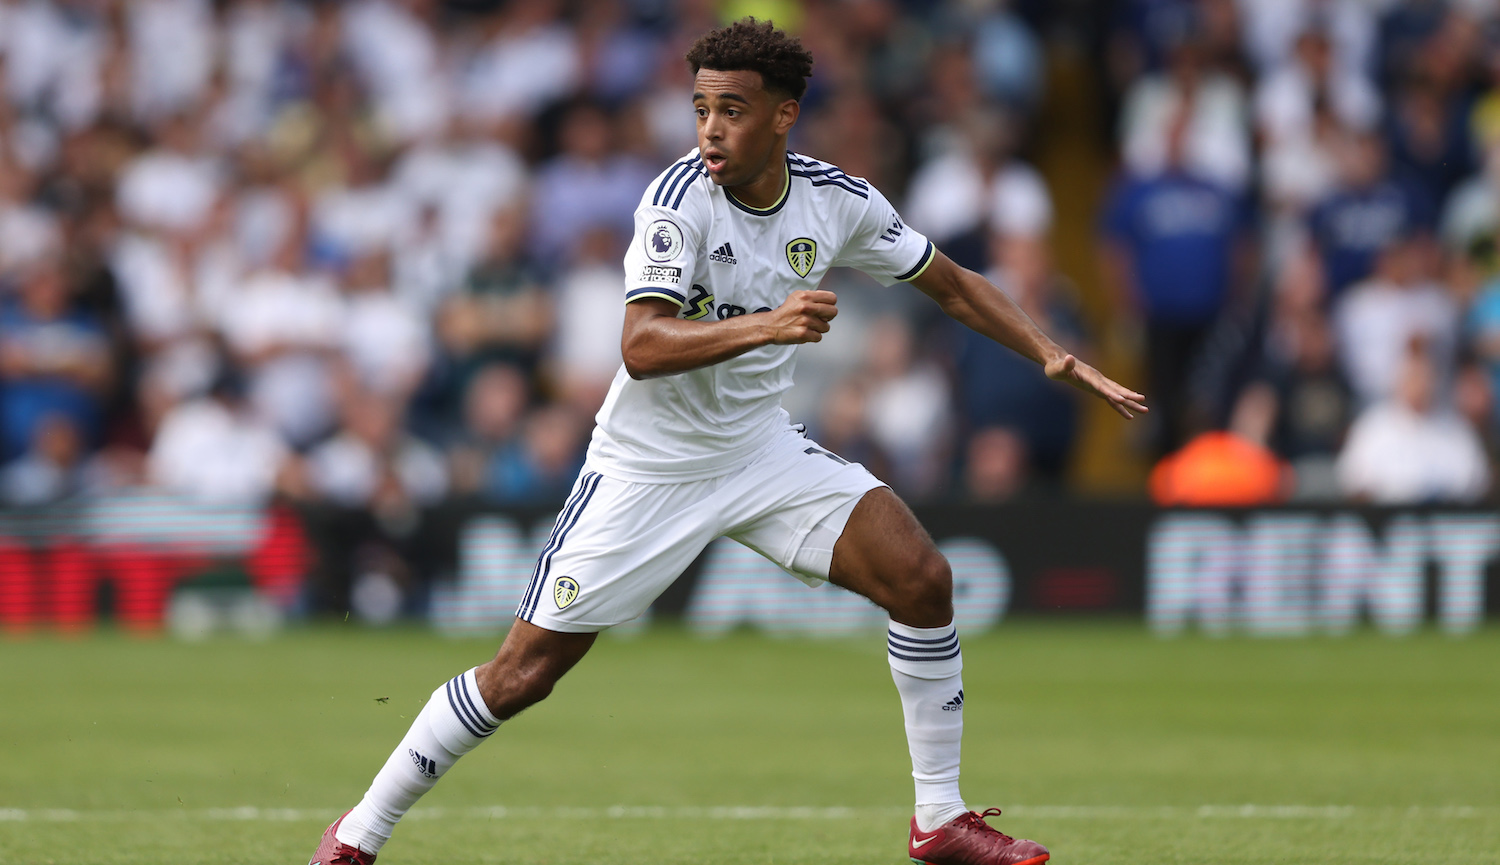 LEEDS, ENGLAND - AUGUST 06: Tyler Adams of Leeds United during the Premier League match between Leeds United and Wolverhampton Wanderers at Elland Road on August 6, 2022 in Leeds, United Kingdom. (Photo by Marc Atkins/Getty Images)